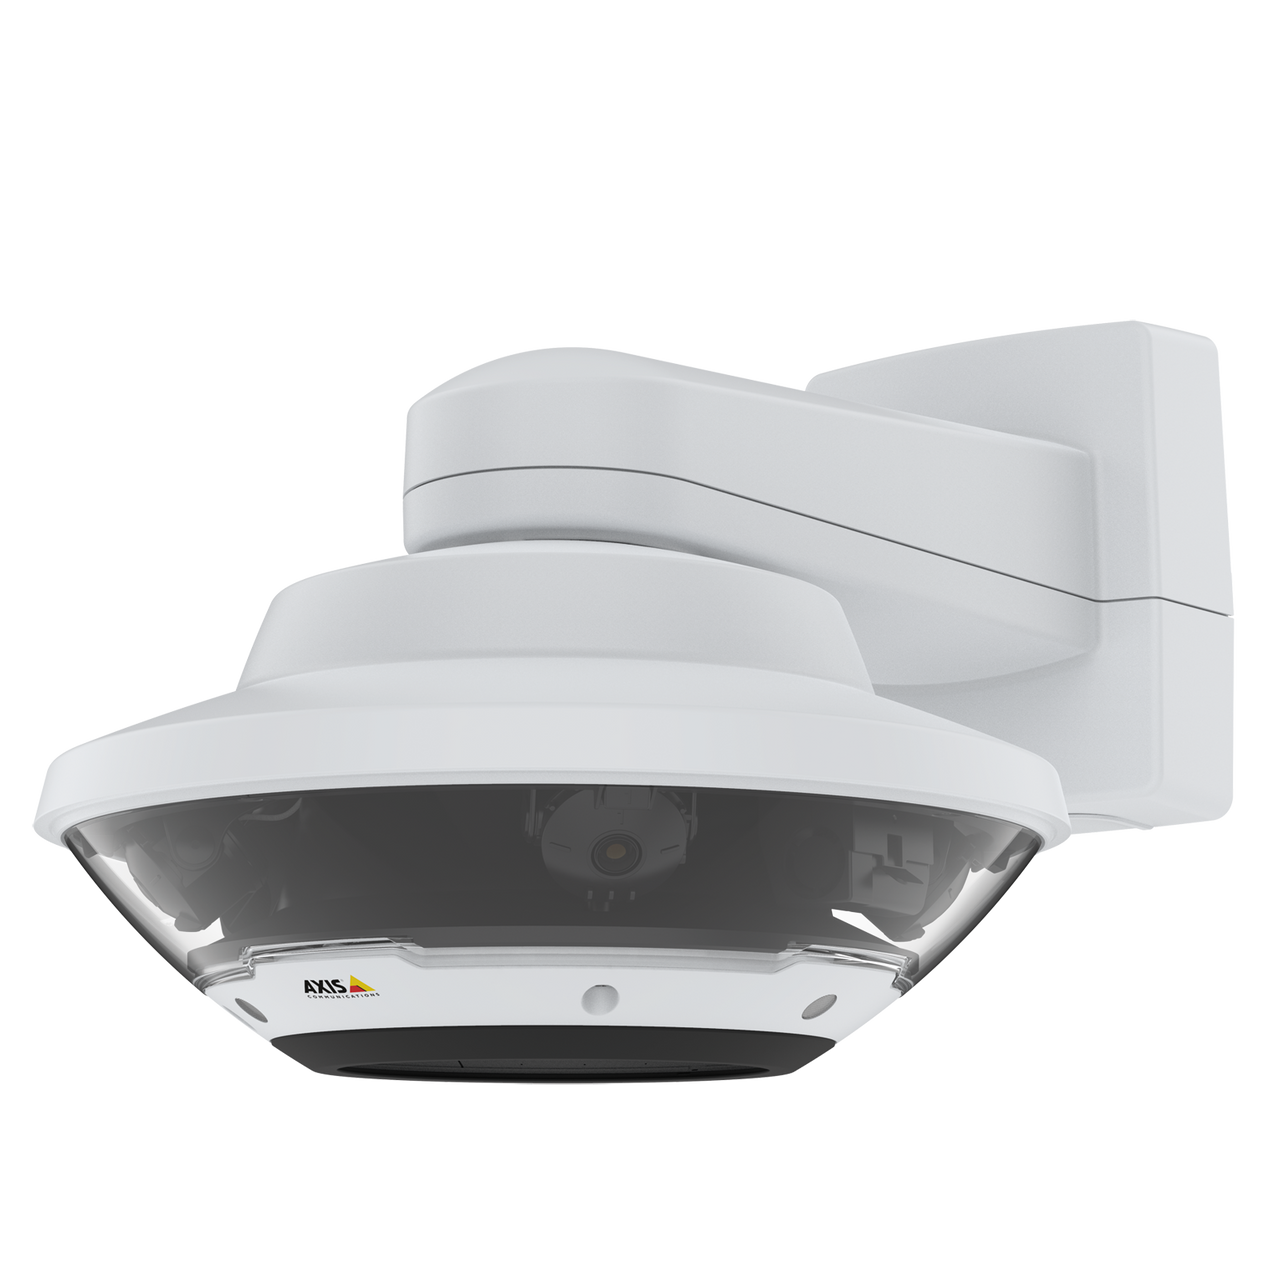 AXIS Q6100-E 60HZ For 360° real-time monitoring and great detail